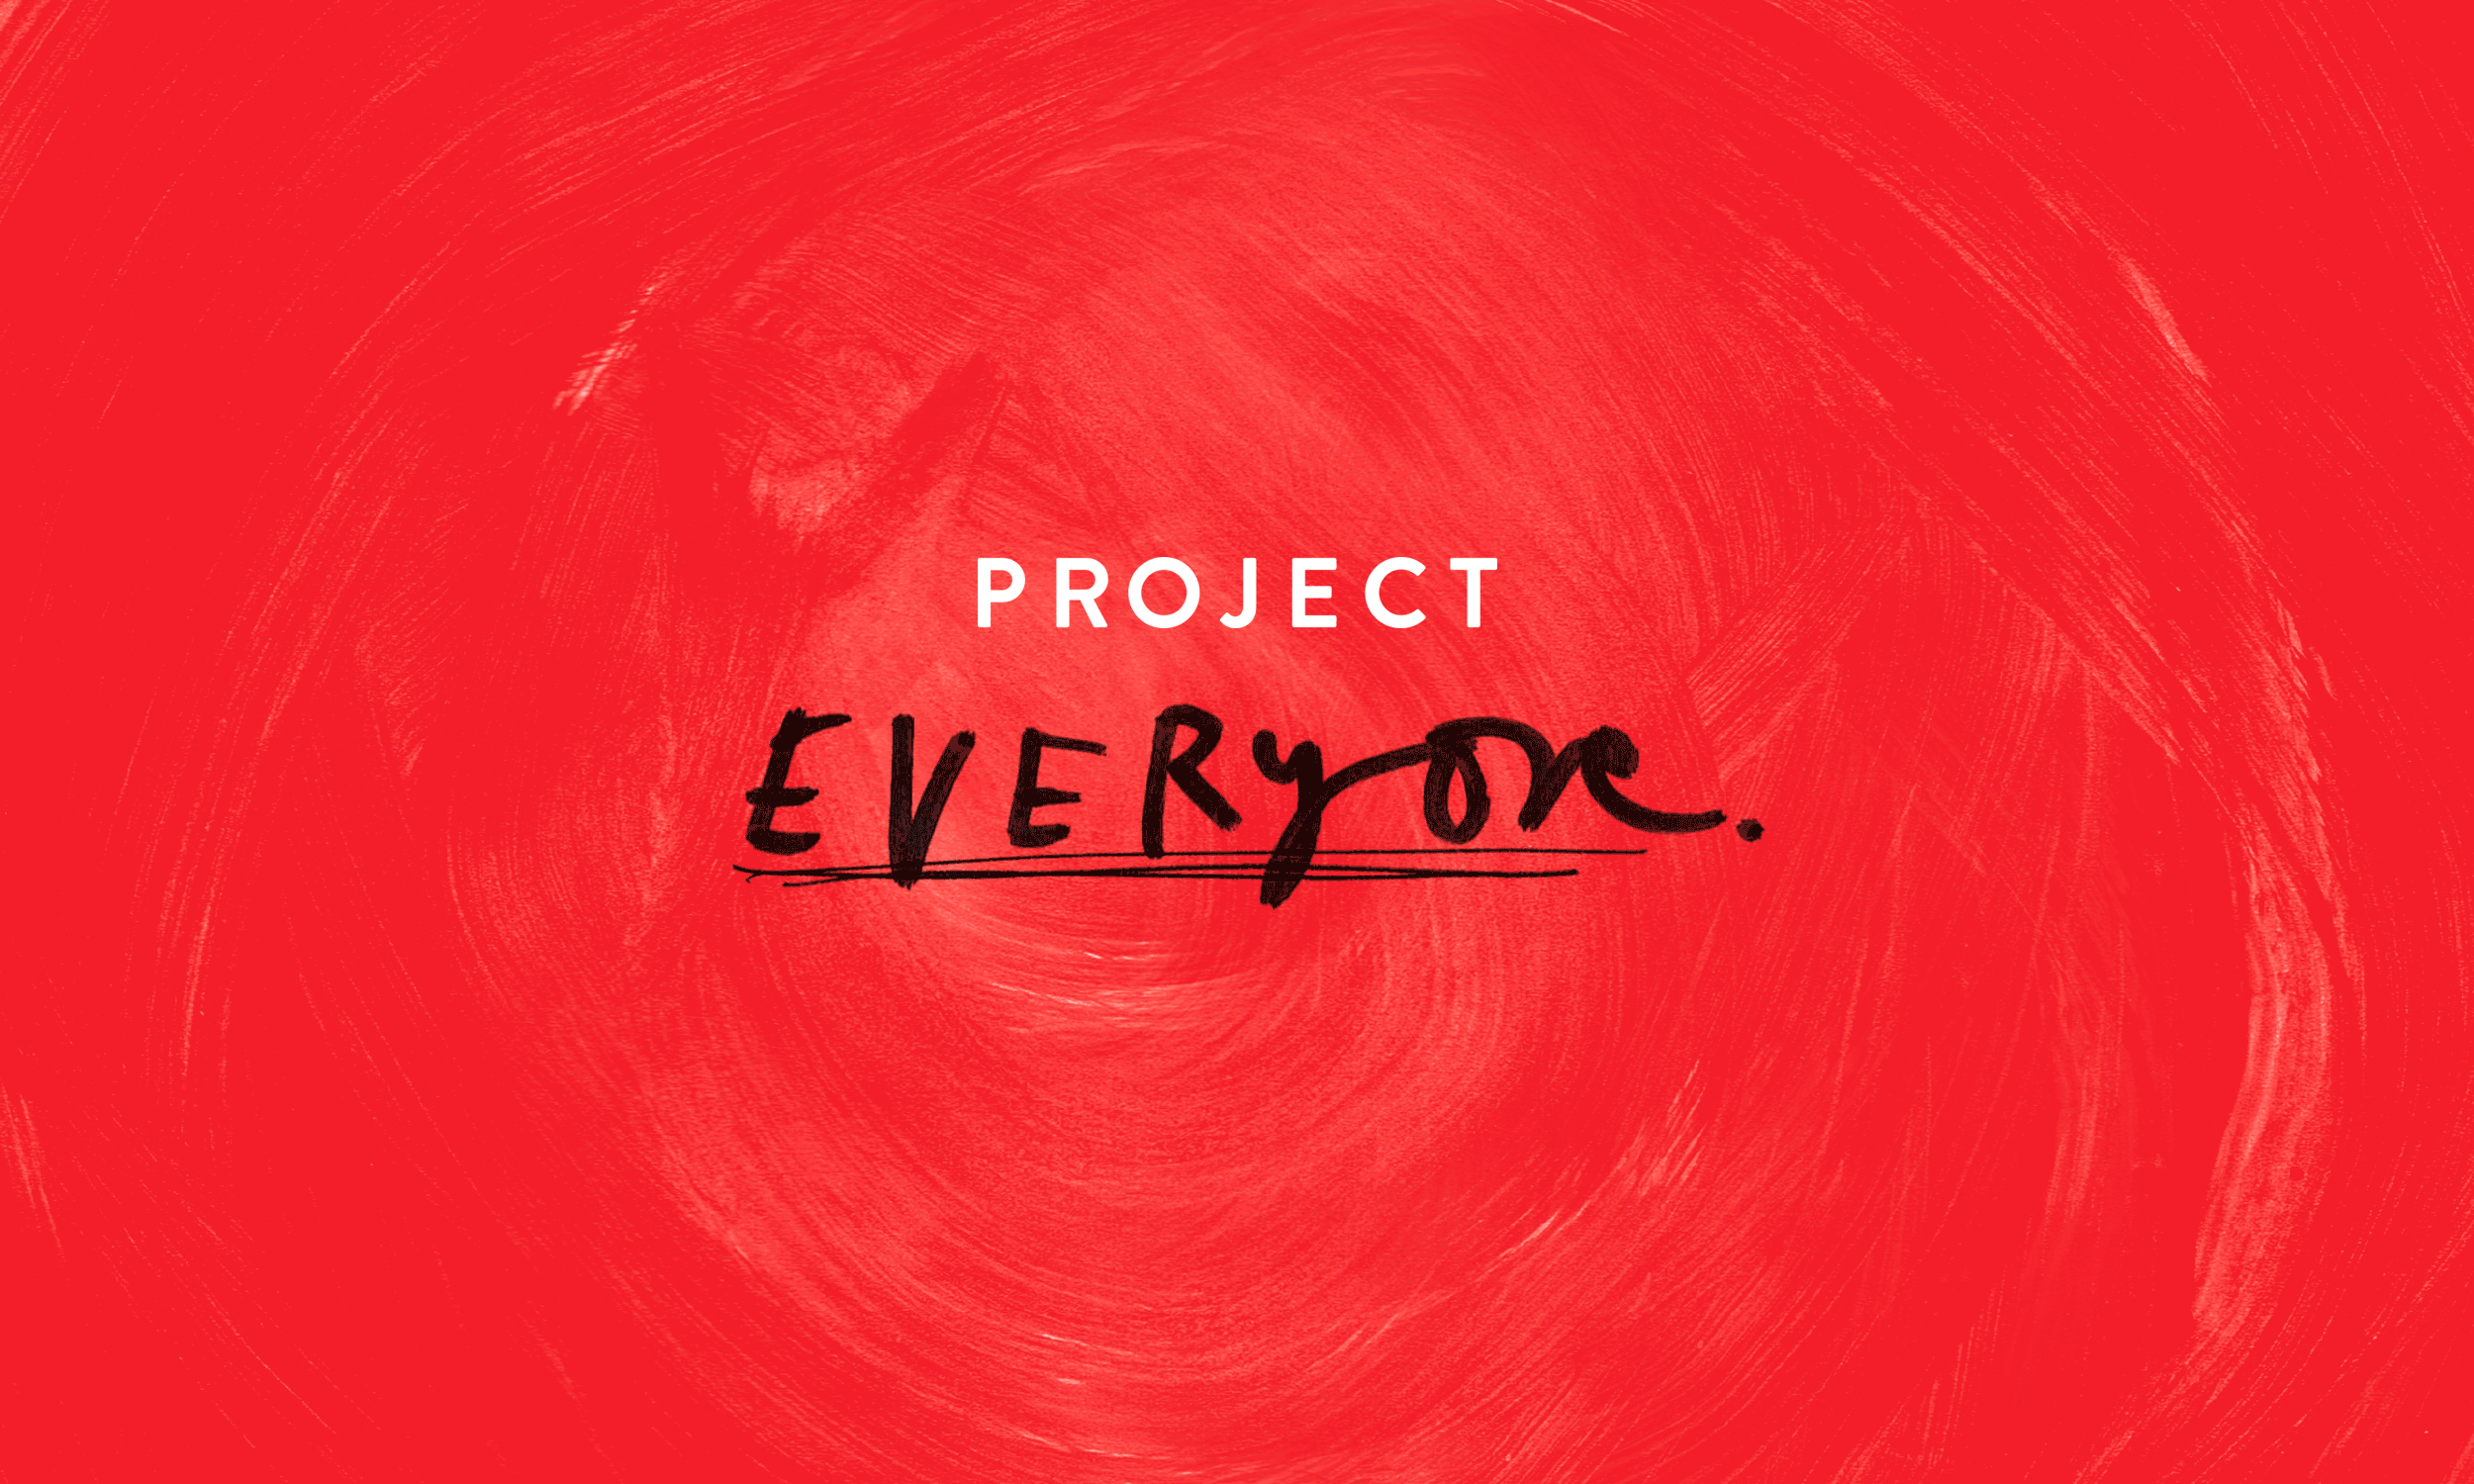 Everyone Logo - Project Everyone logo, animated to demonstrate how many handwritten